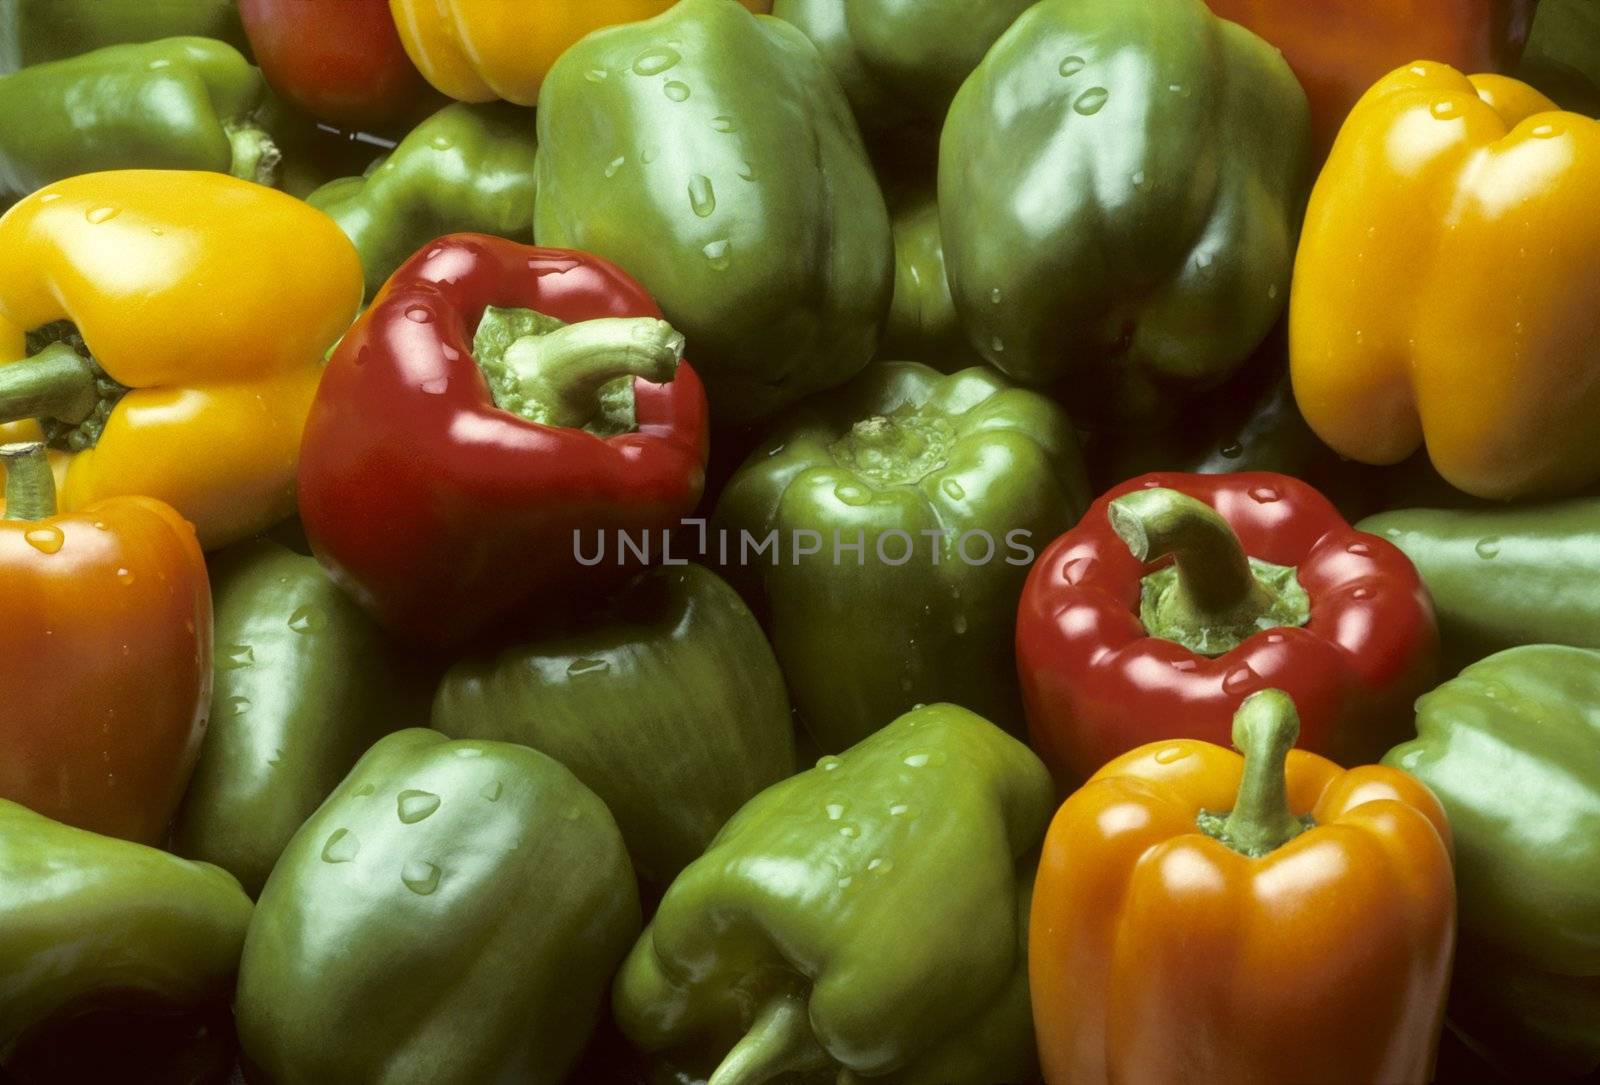 Bell peppers of various colors filling the frame